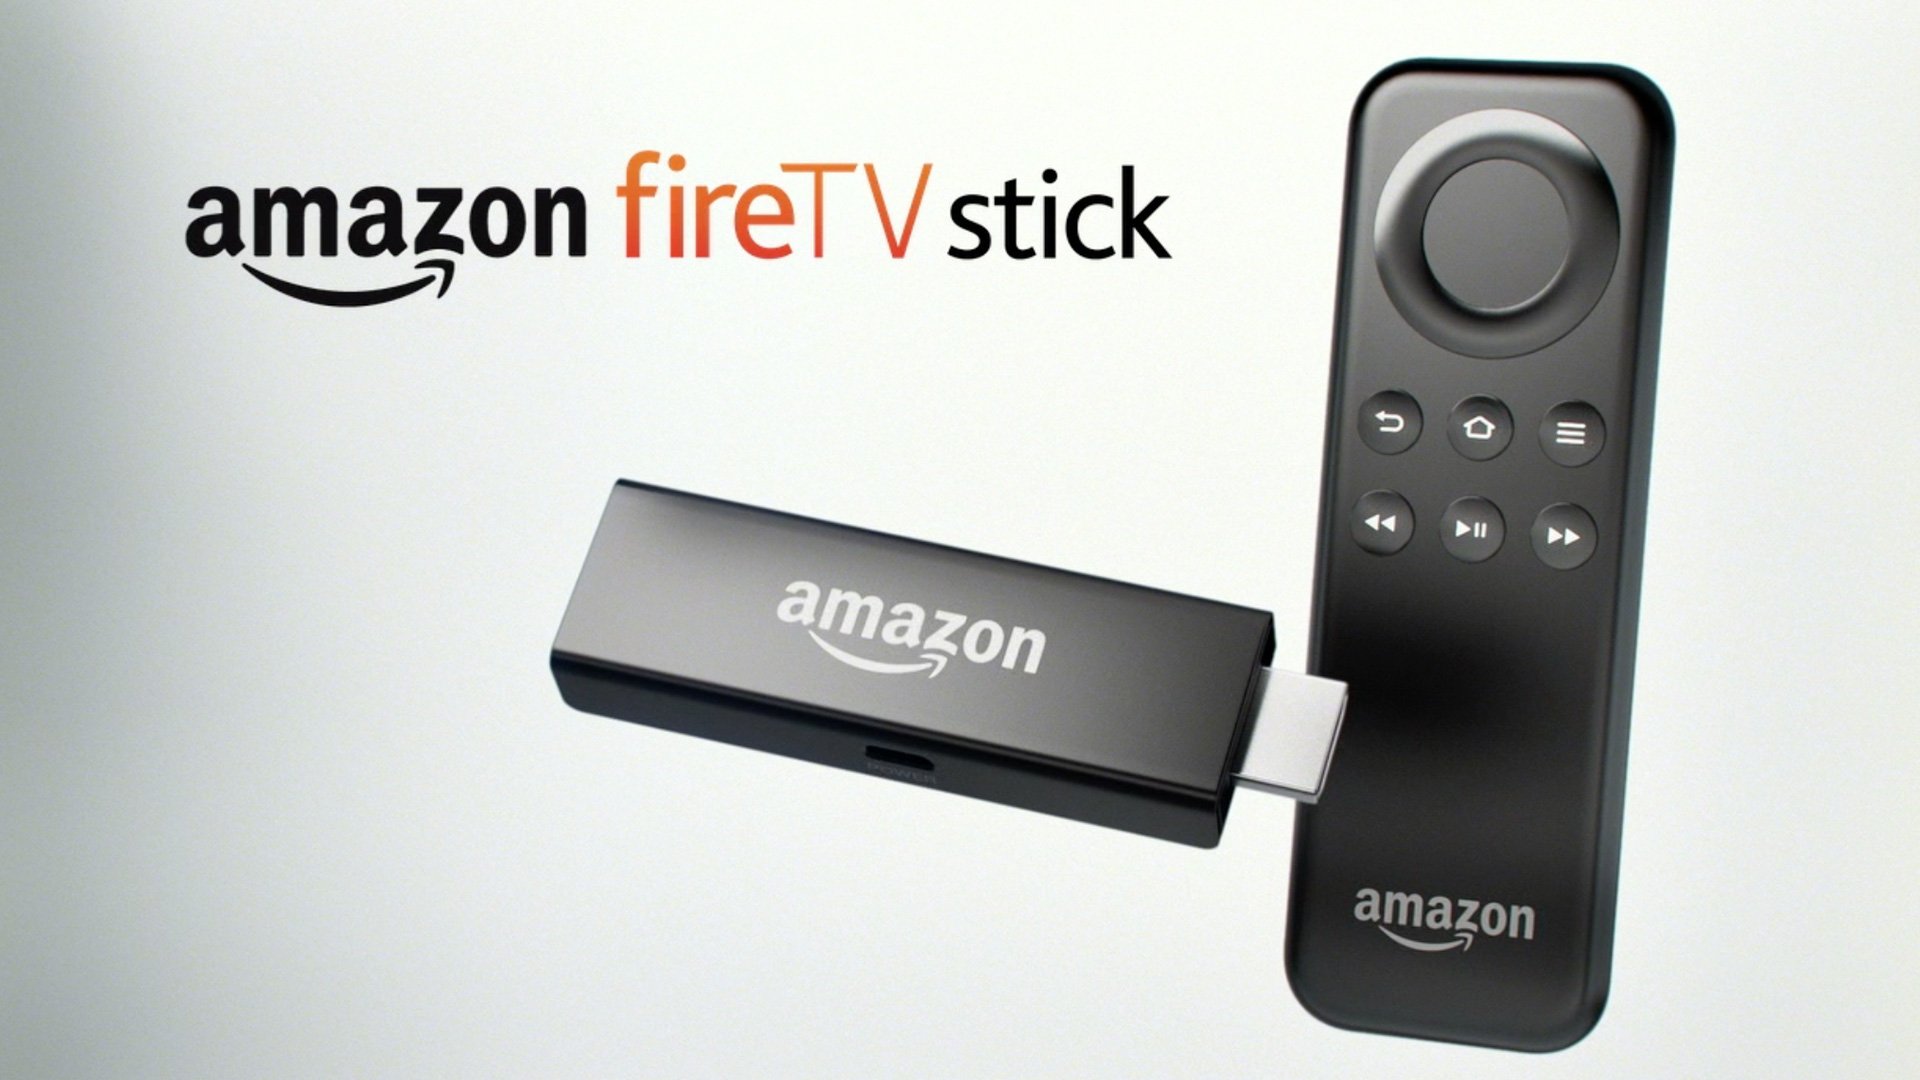 Fire TV Stick Product Video